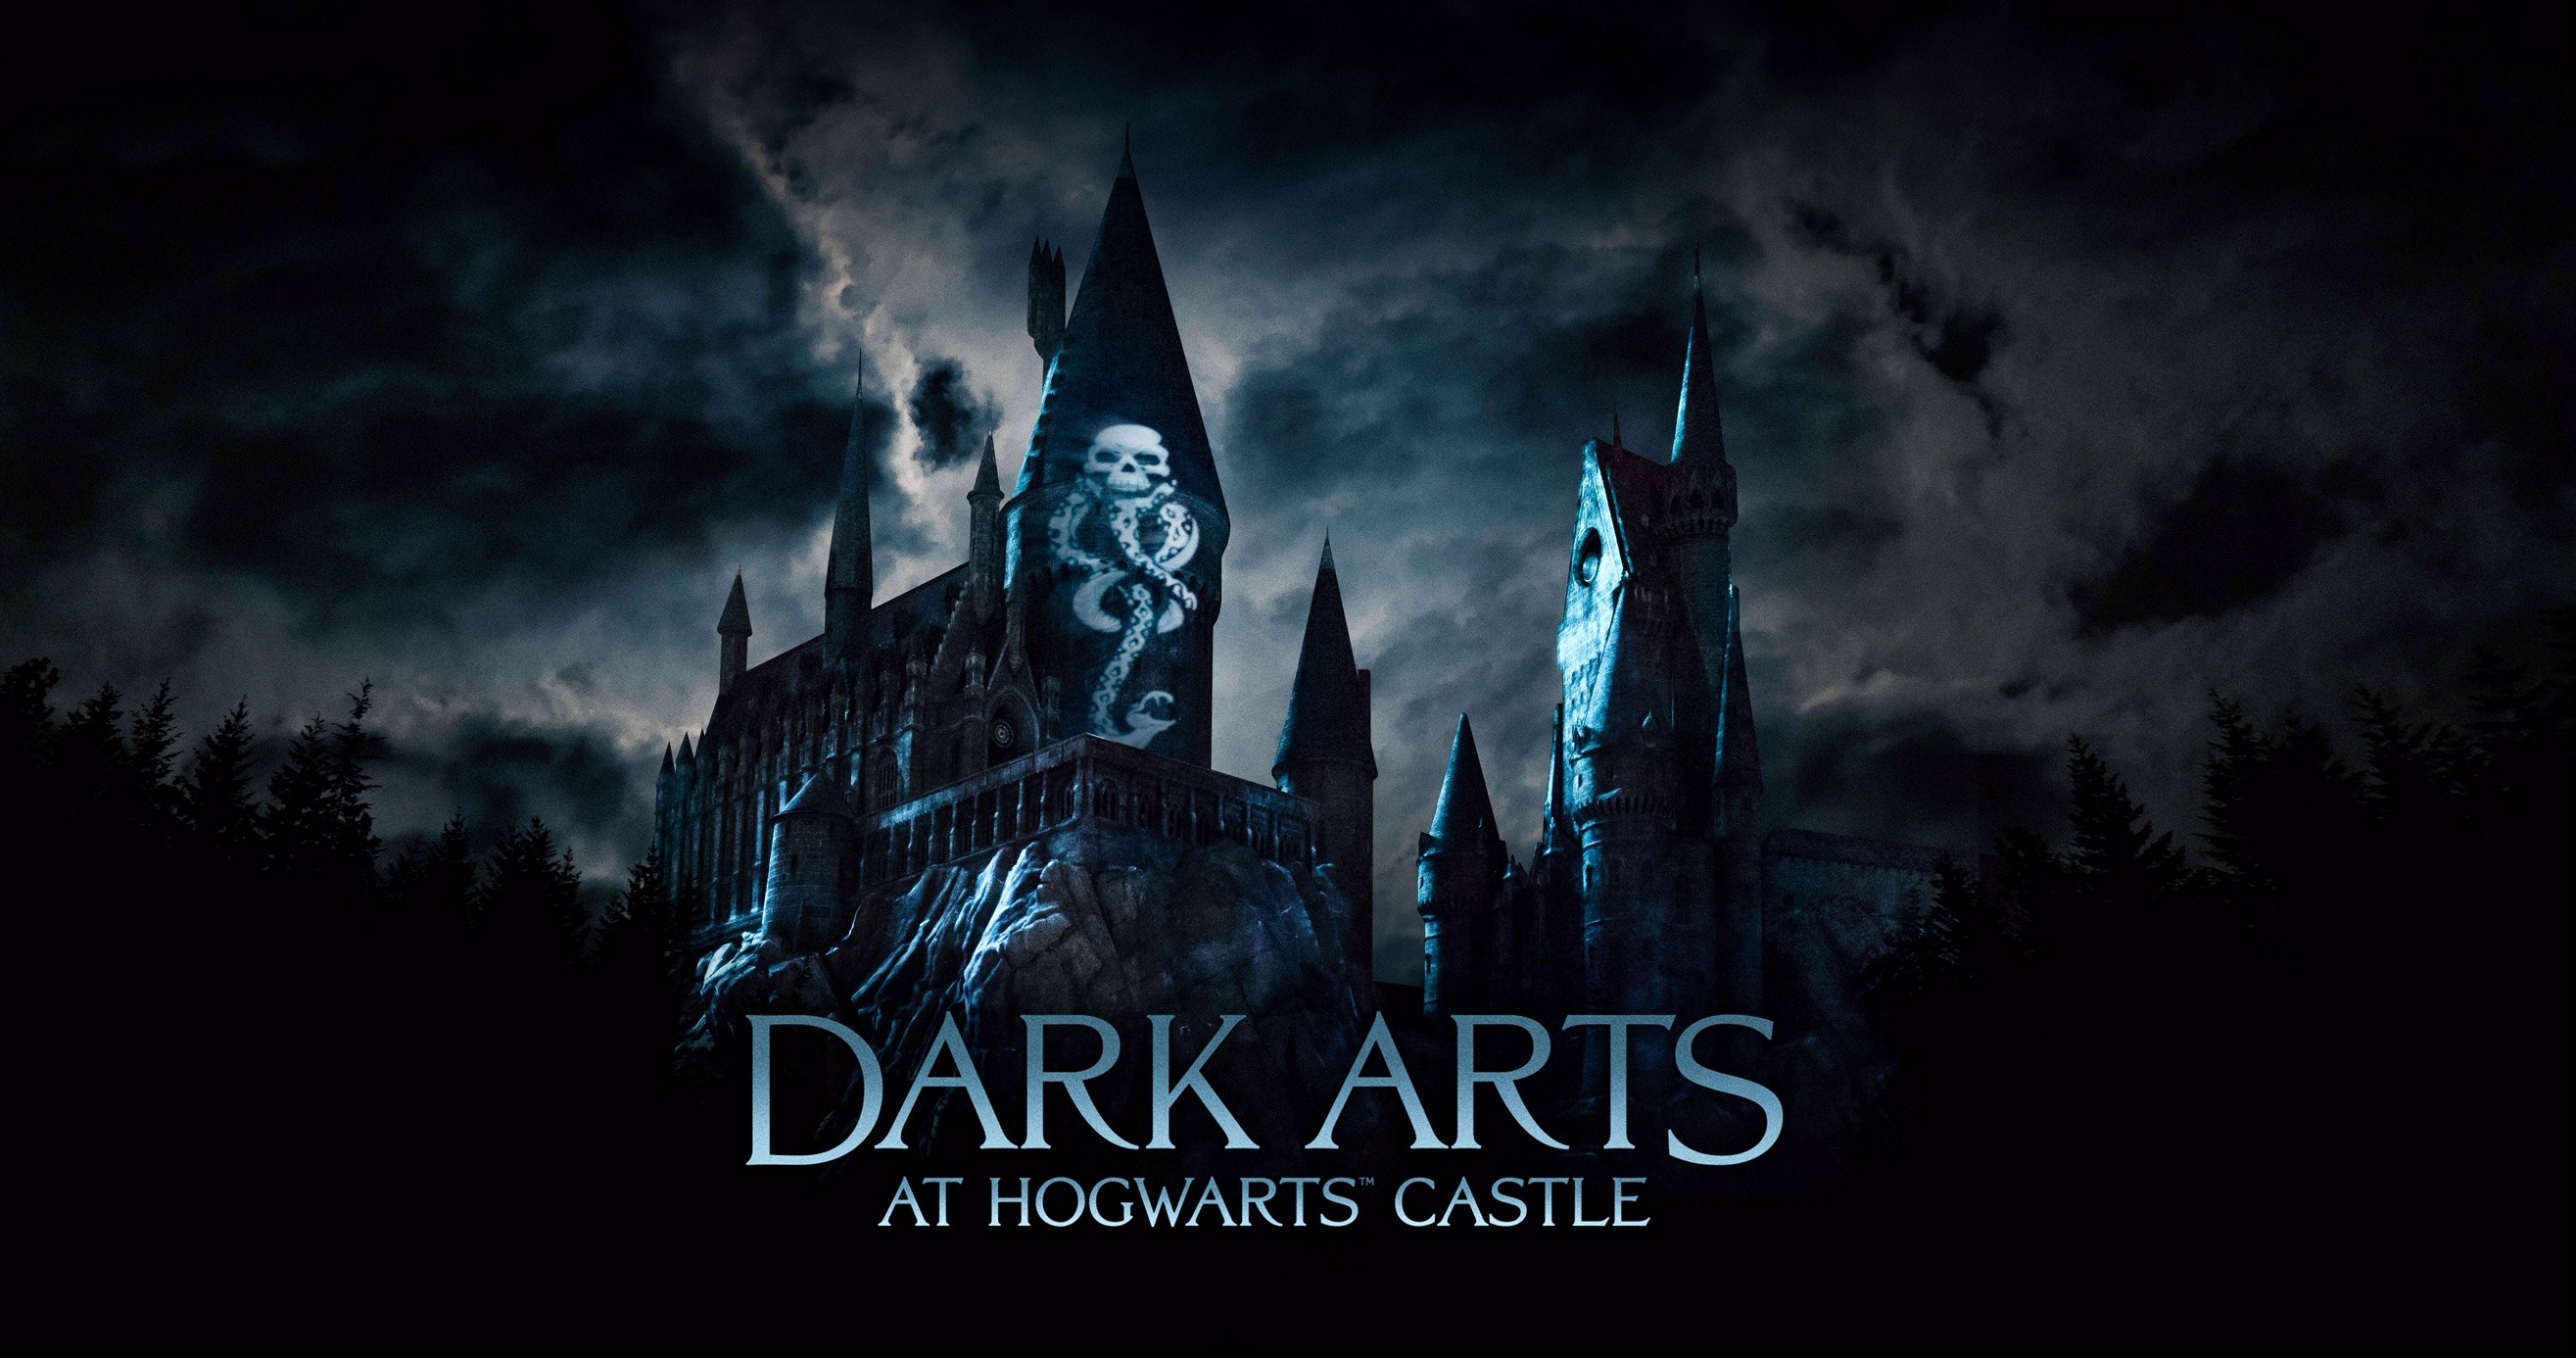 “Dark Arts at Hogwarts Castle,” a dynamic, all-new light projection experience, comes to “The Wizarding World of Harry Potter” at Universal Studios Hollywood and Universal Orlando Resort